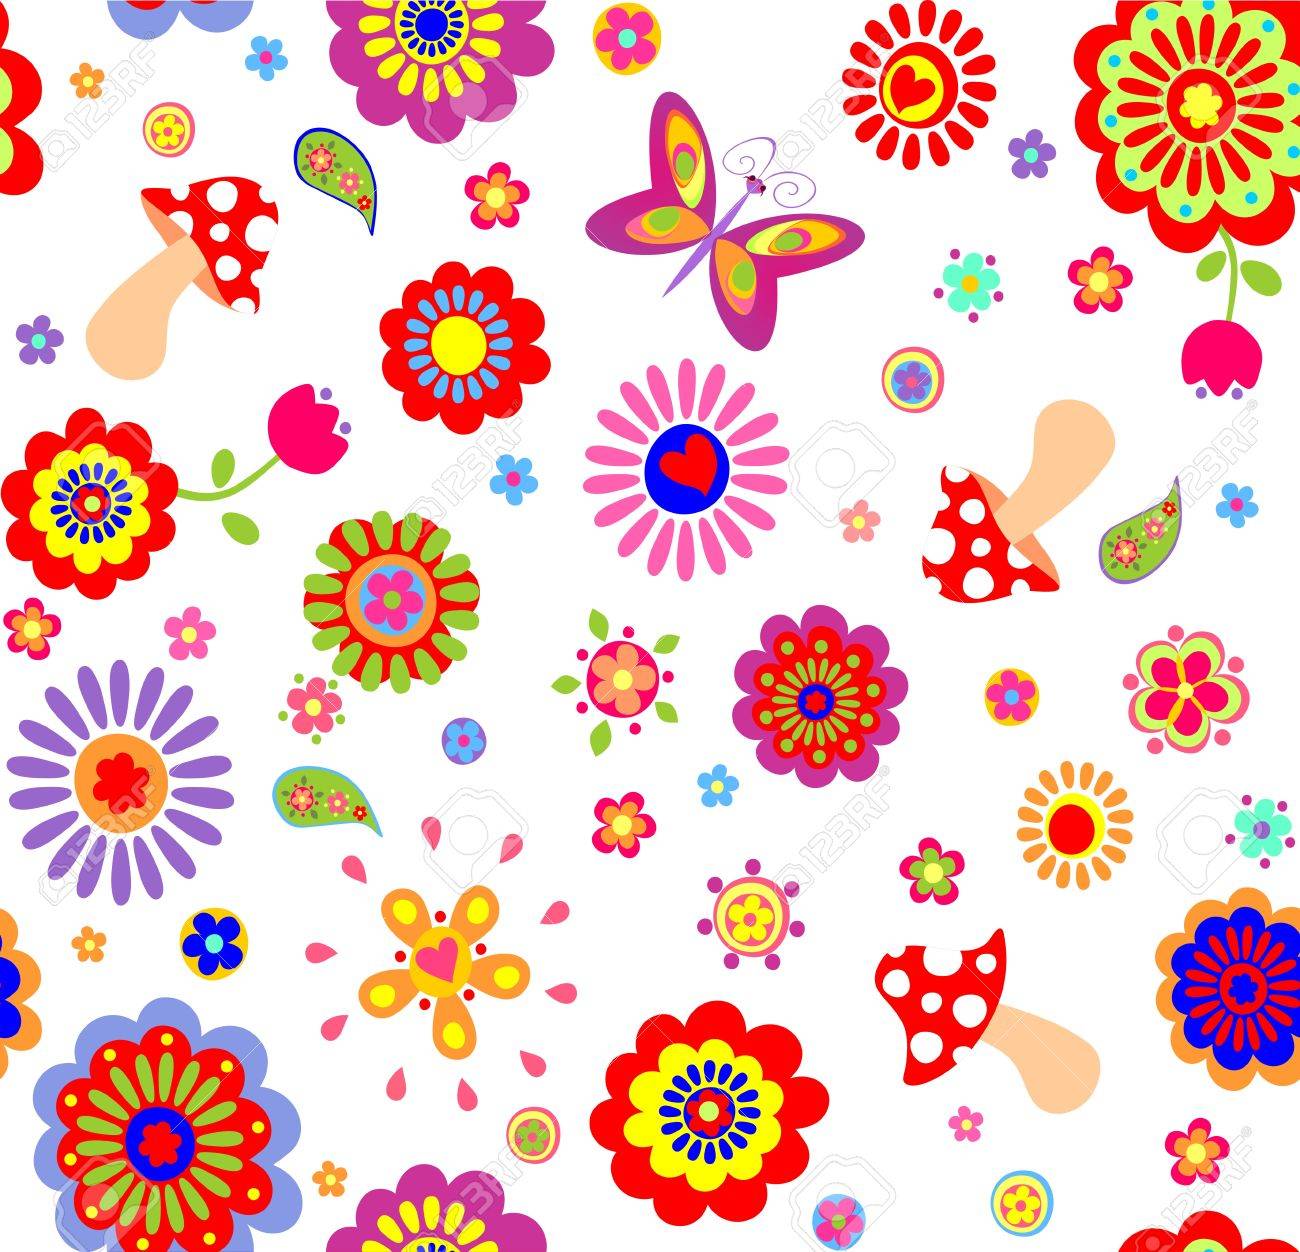 Childish Wallpaper With Colorful Abstract Flowers And Mushrooms